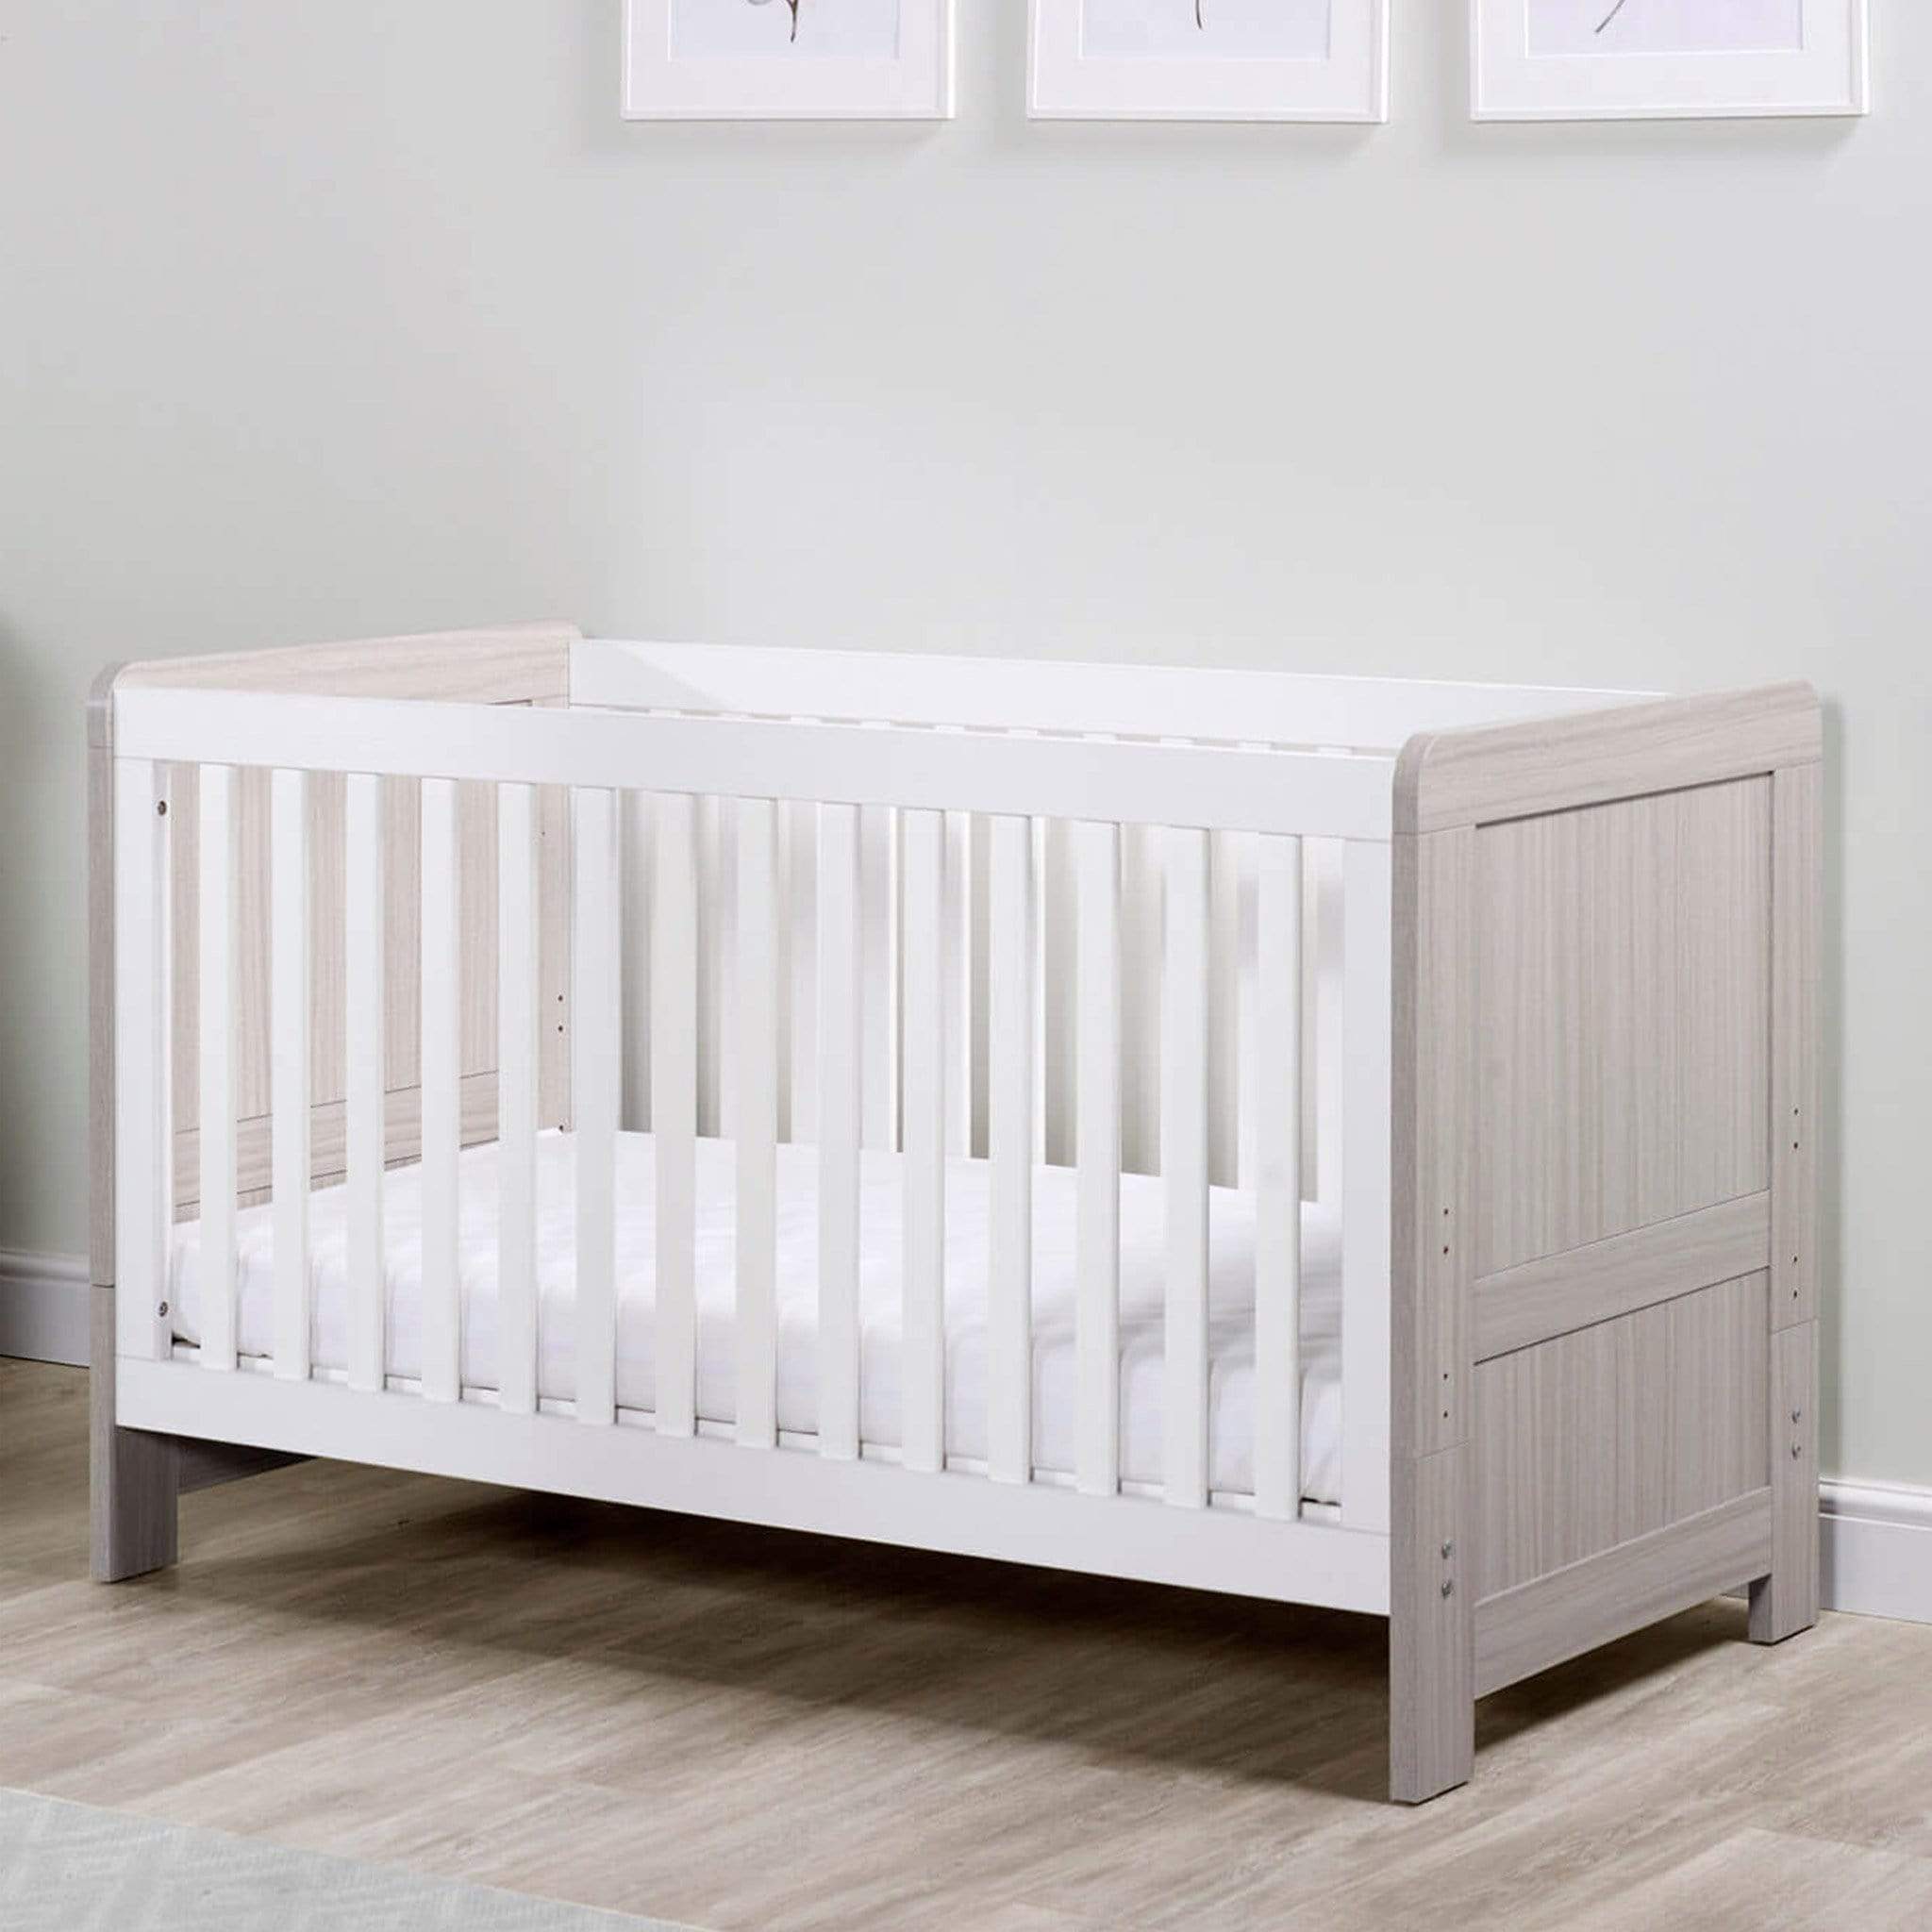 Ickle Bubba Pembrey Cot Bed Ash Grey & White Cot Beds